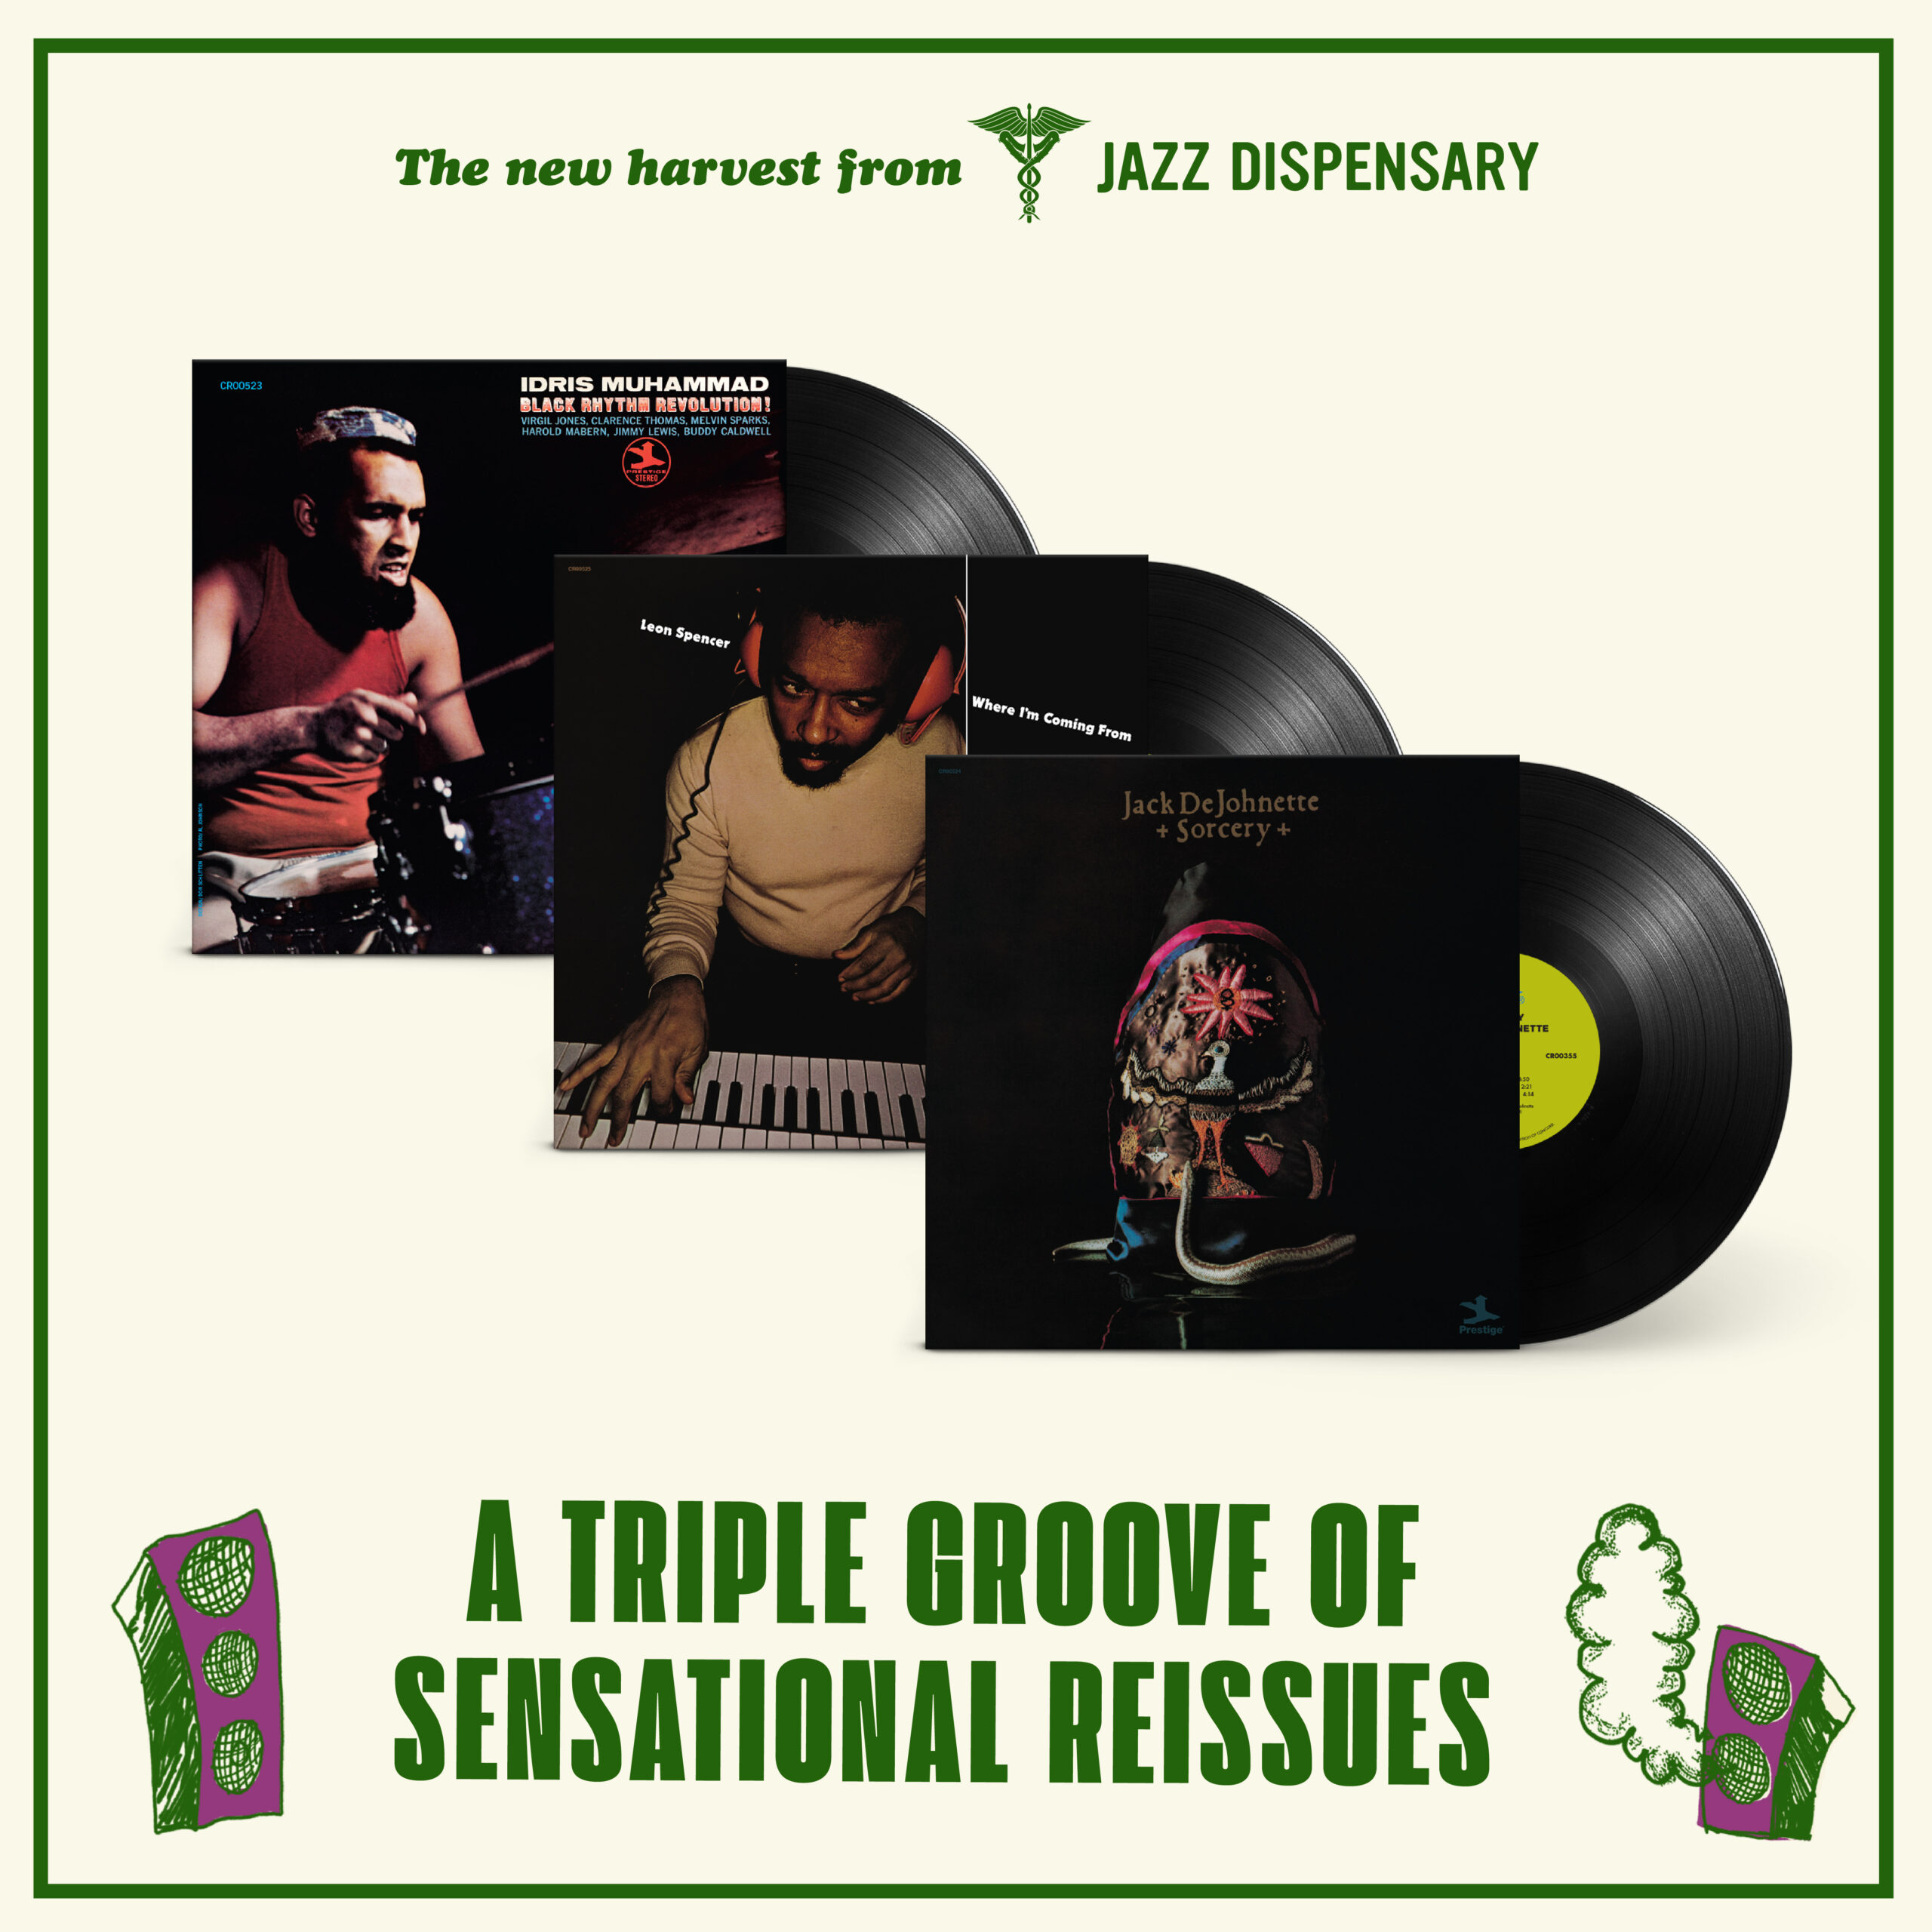 Featured image for “A TRIPLE GROOVE OF TOP SHELF REISSUES FROM IDRIS MUHAMMAD, JACK DeJOHNETTE, AND LEON SPENCER”